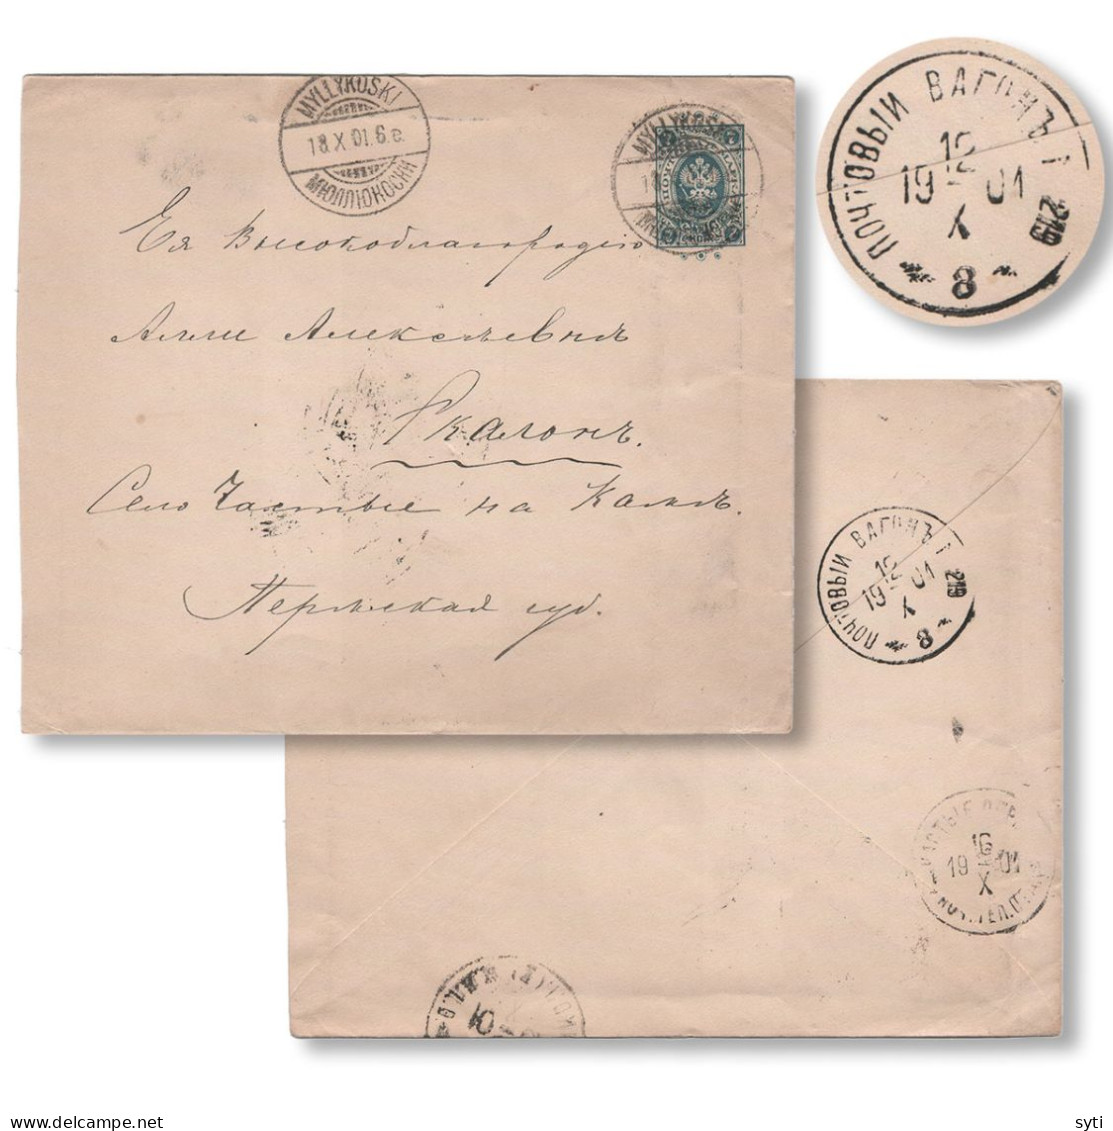 Russia 1902 Cover Railway TPO N.219 PERM - KOTLAS ( Scarce ) From Finland To Kama - Covers & Documents